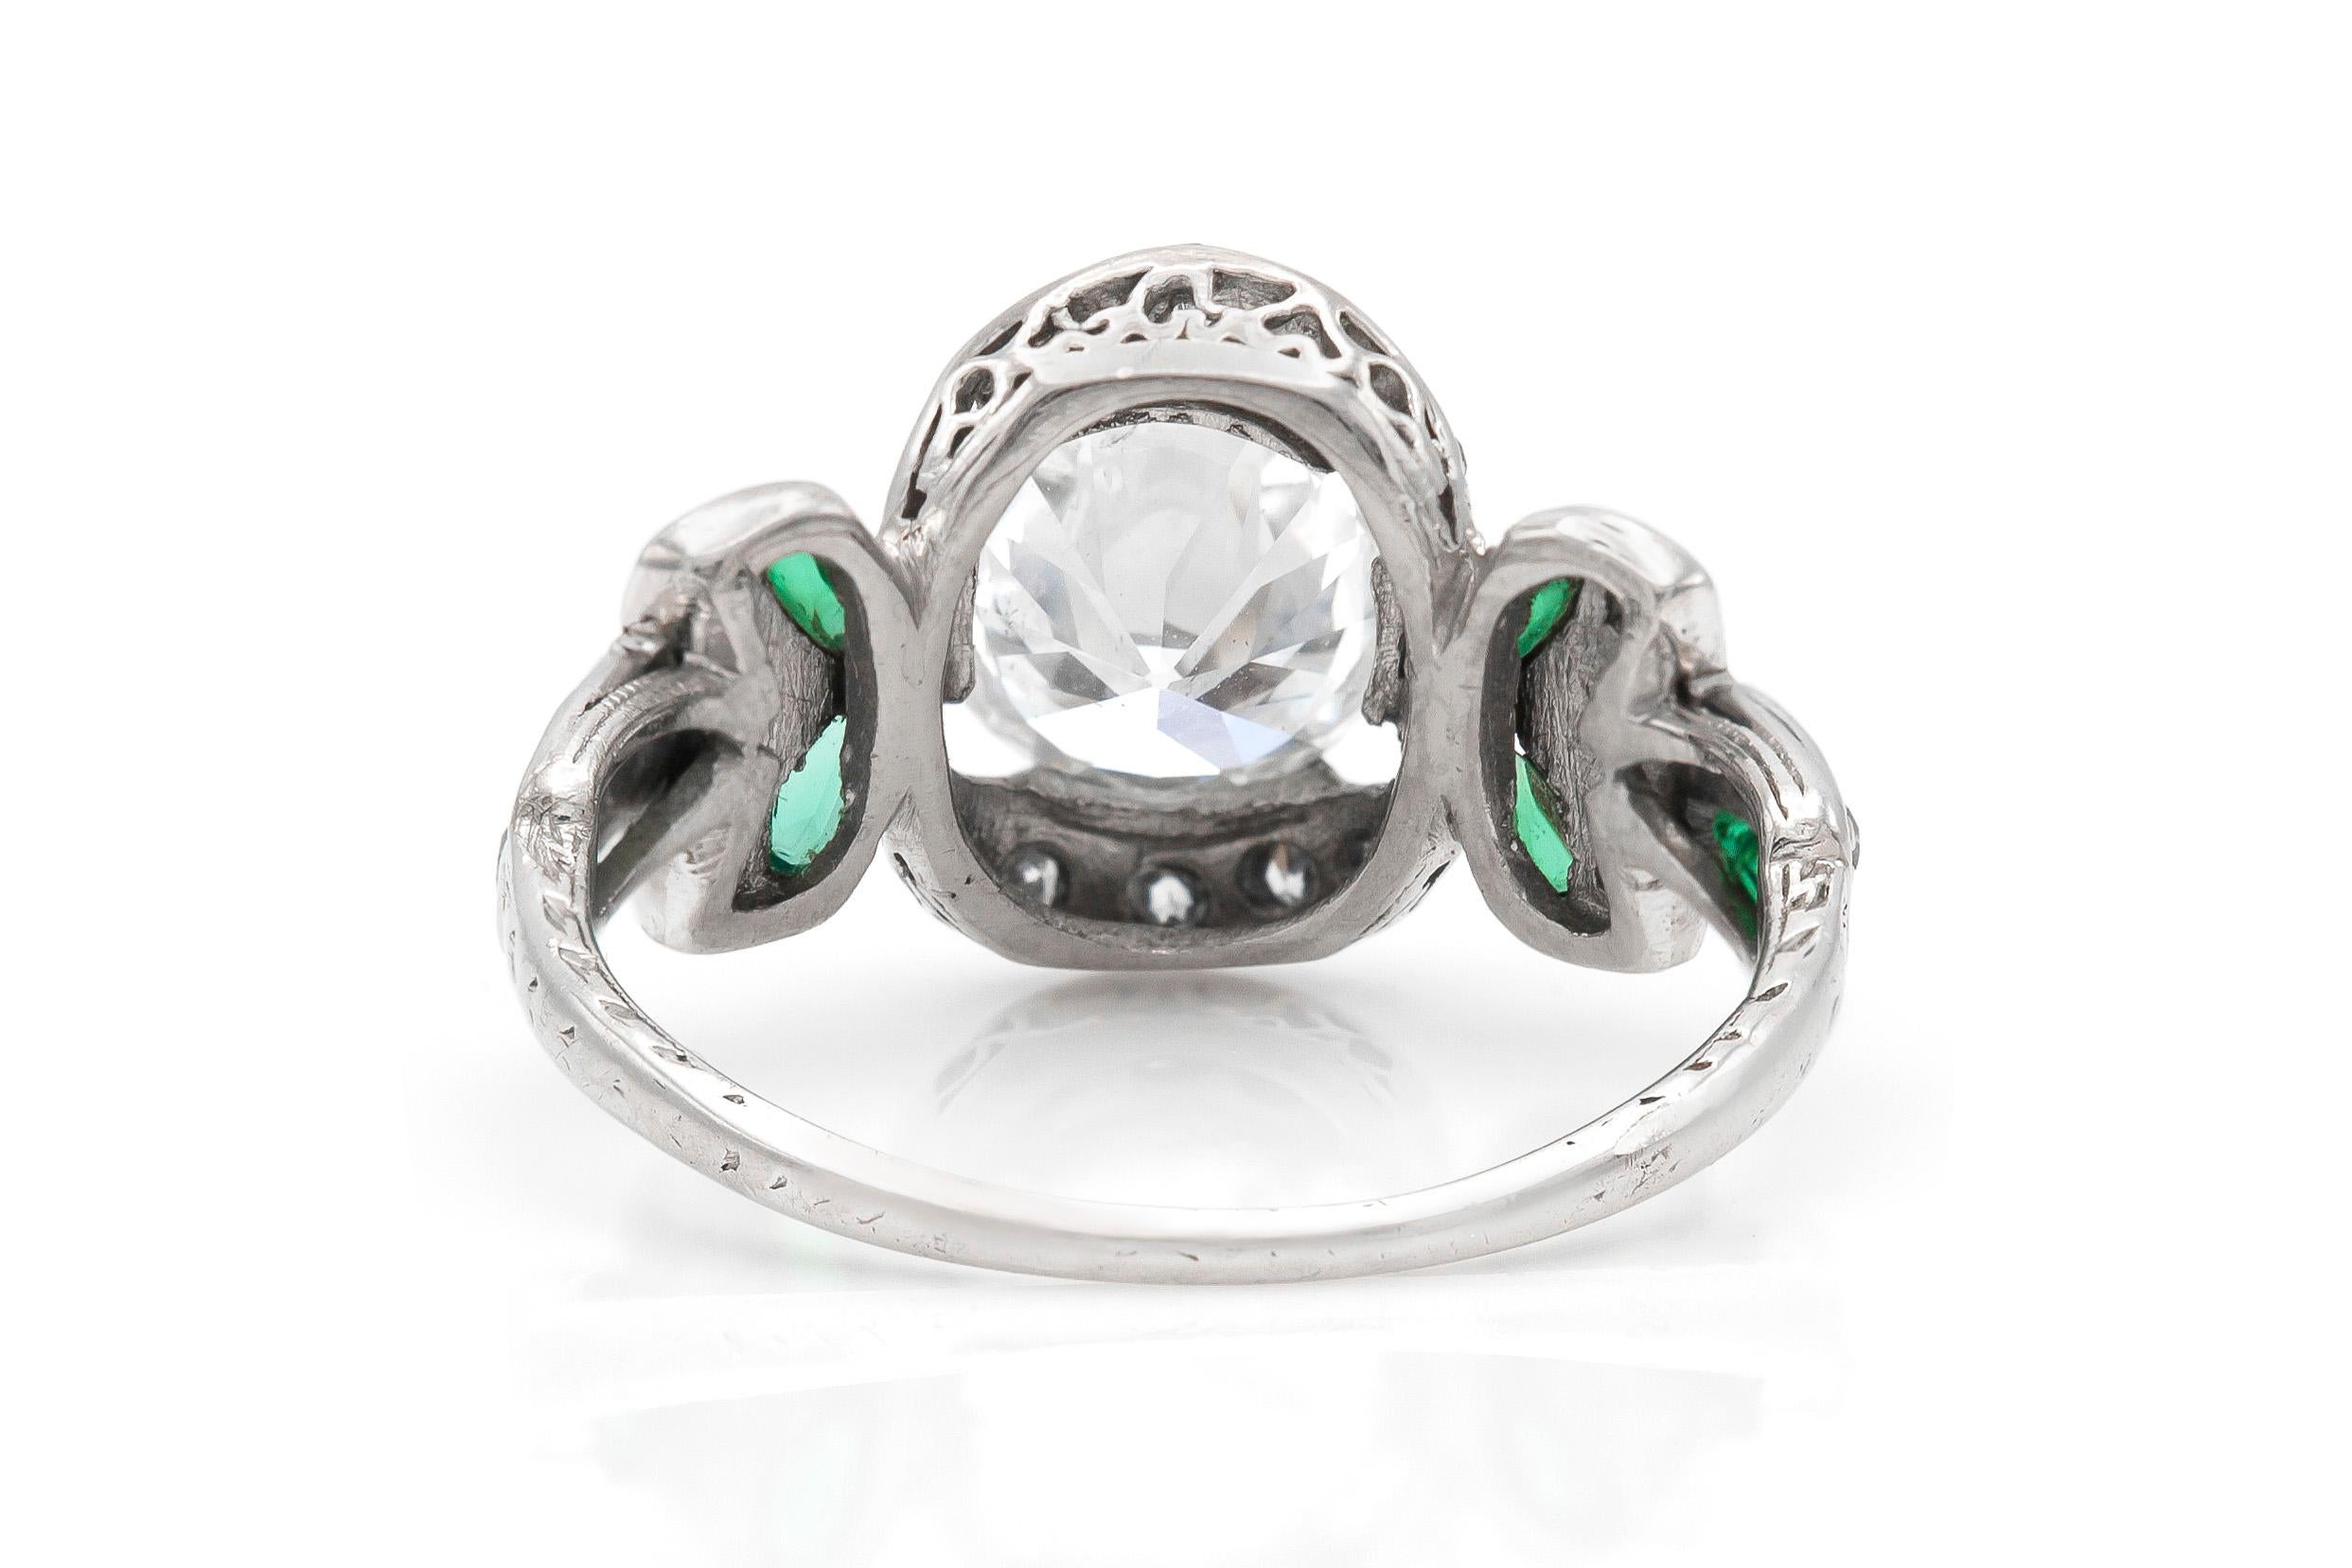 Edwardian 1.30 Carat Old European Cut Diamond Ring with Emeralds In Good Condition For Sale In New York, NY